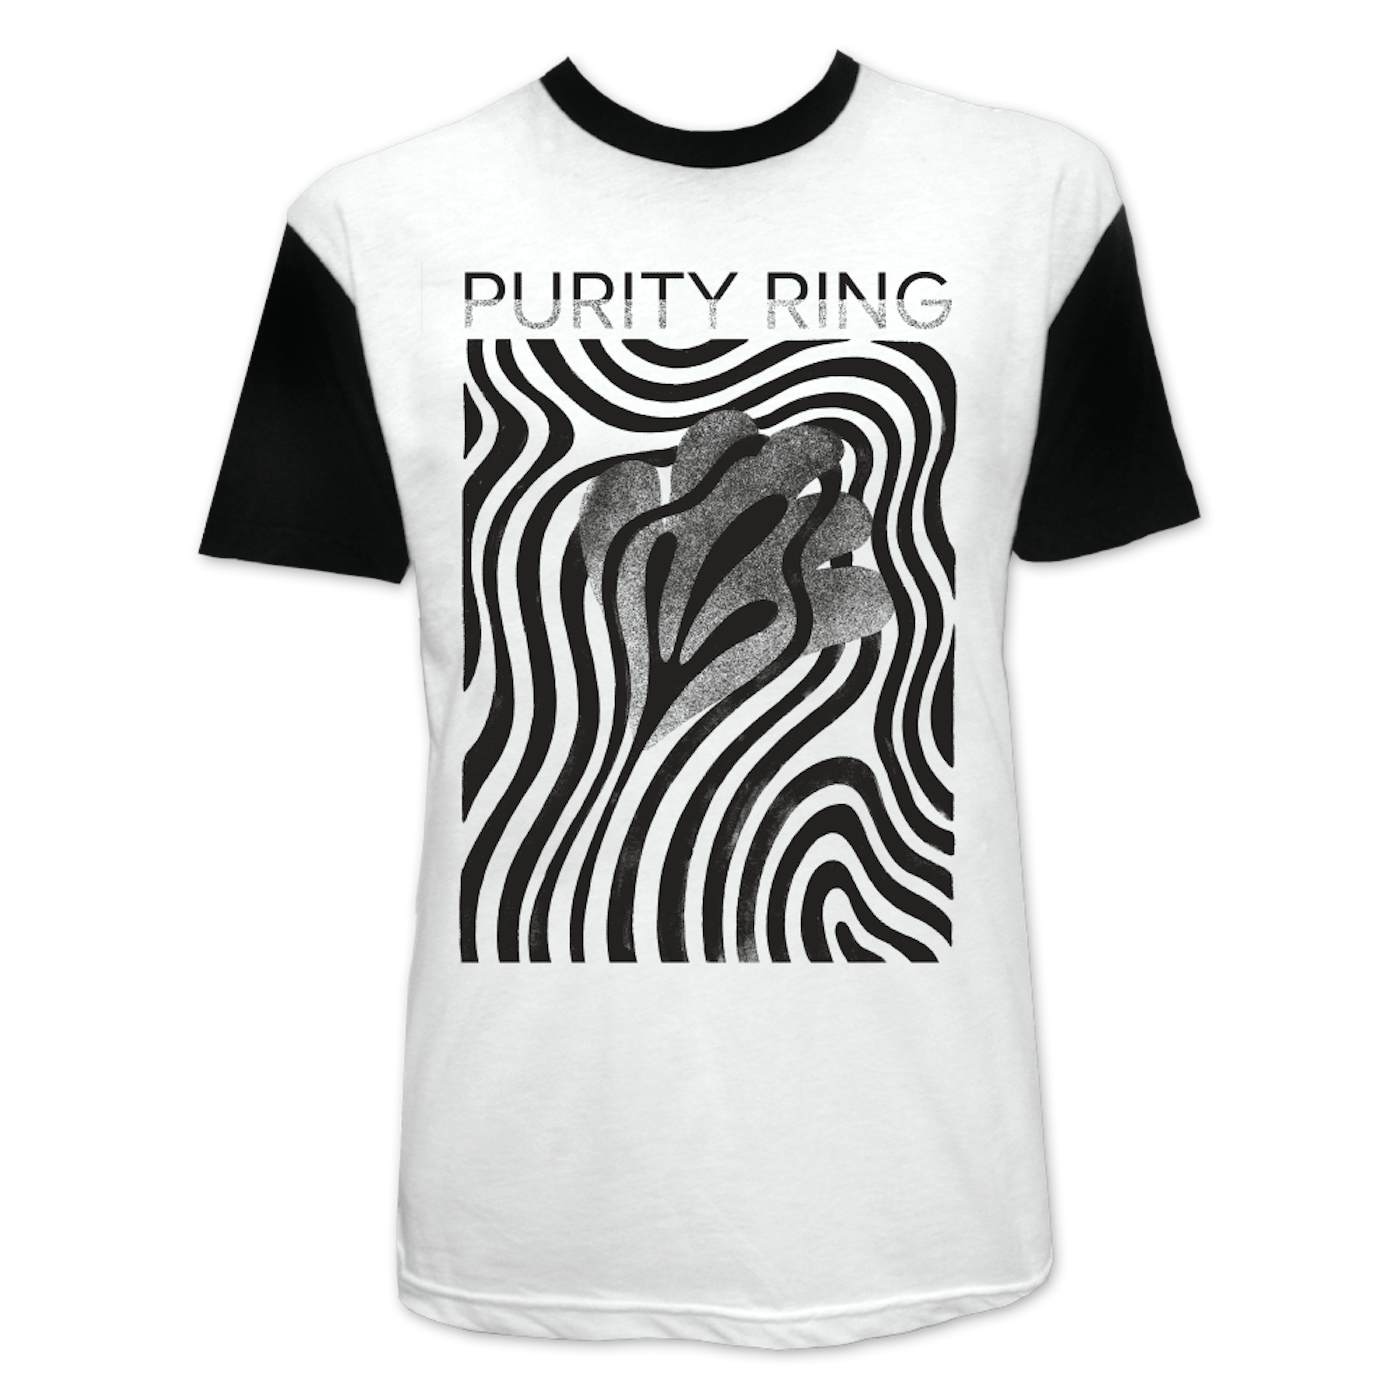 Purity Ring Wavy Colorblock